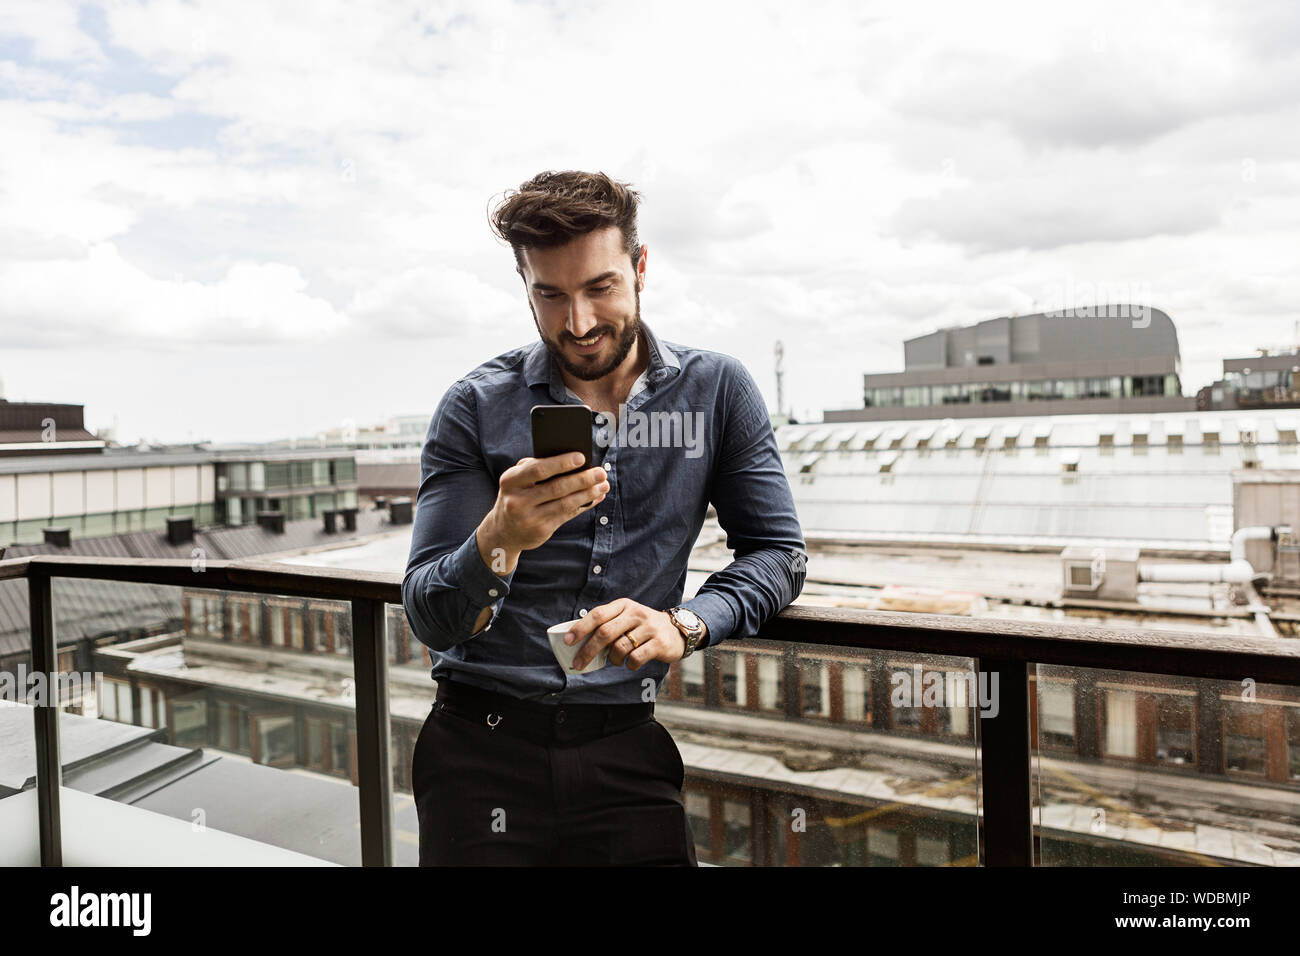 Young man looking at cell phone on balcony Stock Photo